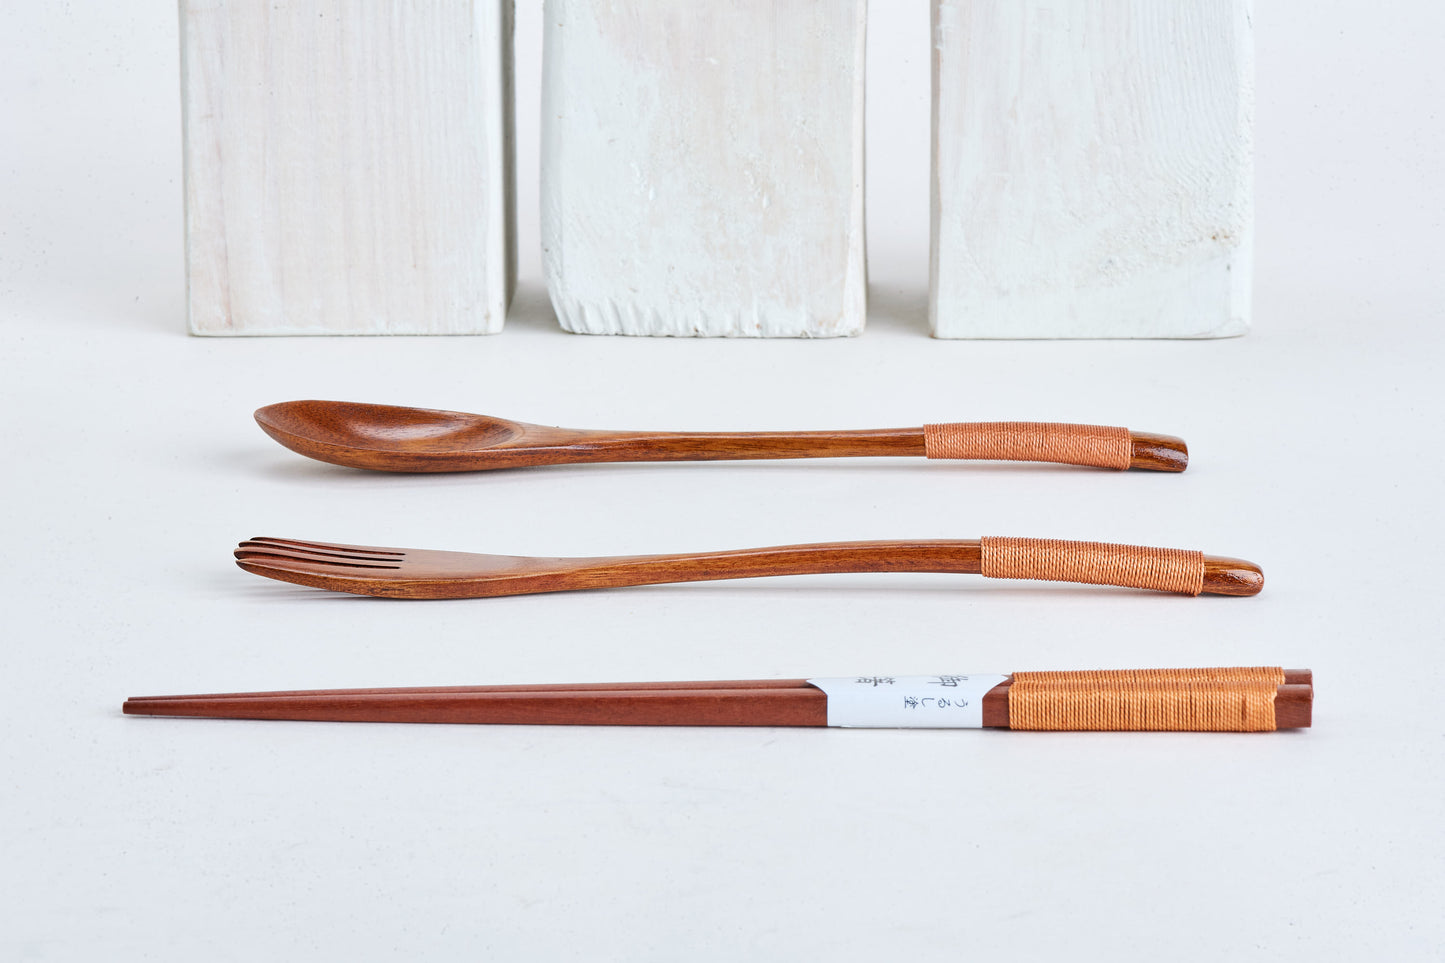 Wooden Travel Utensil Set - Lucid and Real zero waste life low waste living best sustainable gifts plastic free products live zero waste eco friendly home products sustainable gift ideas scandinavian gifts hygge gifts hygge lifestyle hygge life eco friendly gifts scandinavian design zero waste store biodegradable plastic